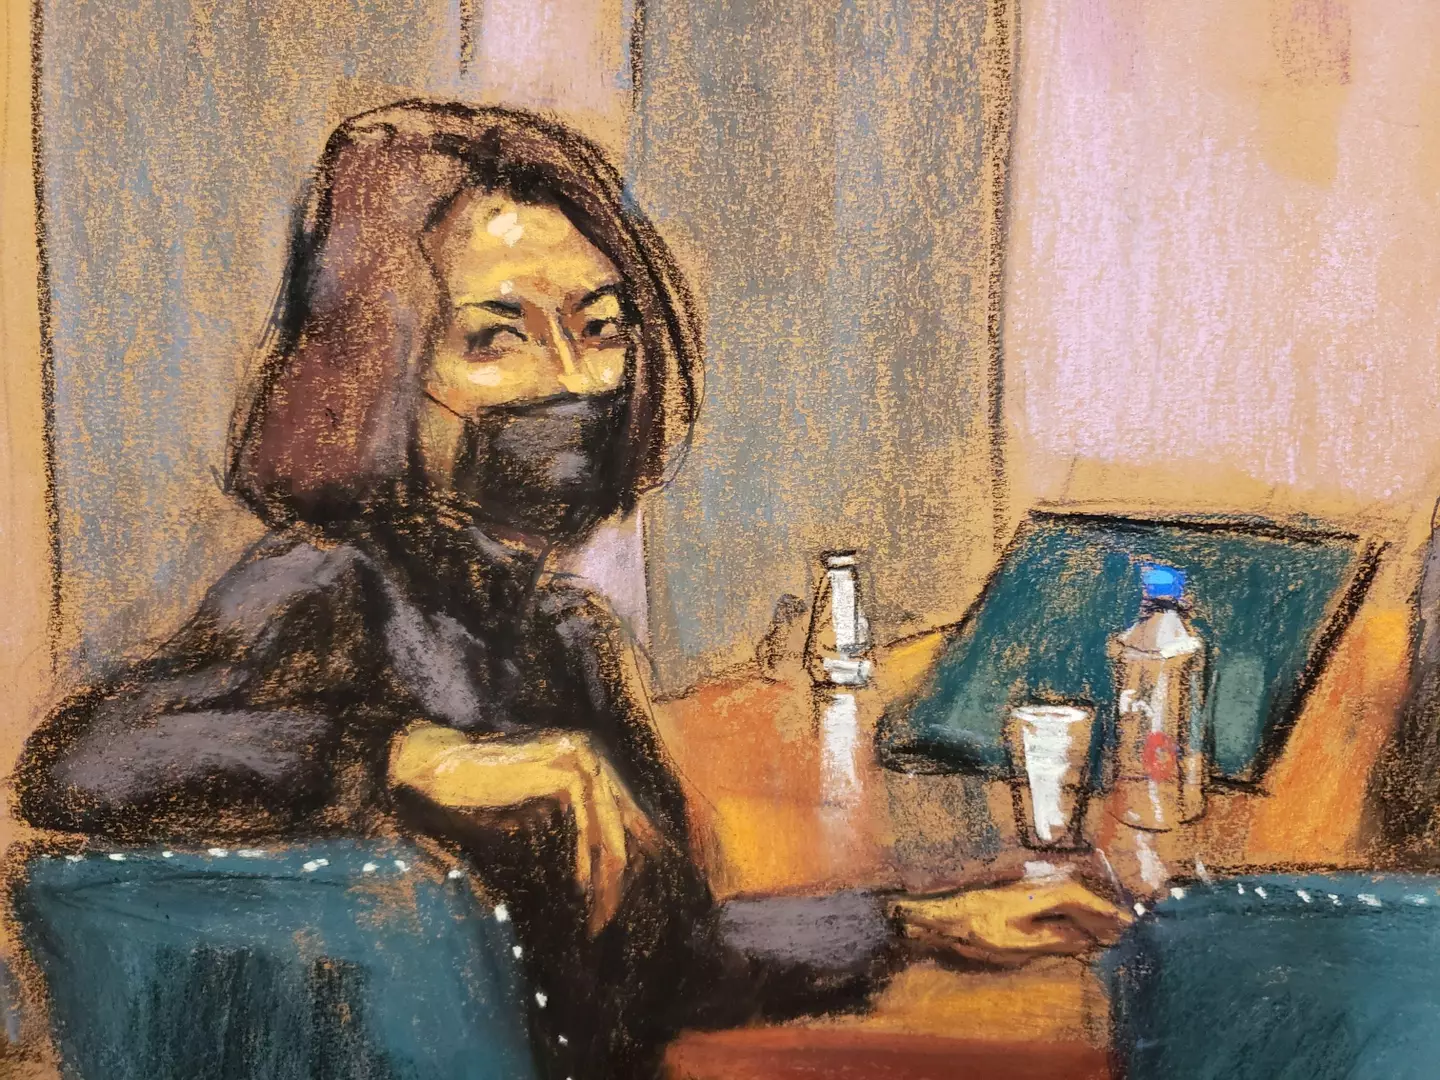 Ghislaine Maxwell as depicted in a courtroom sketch during her trial.